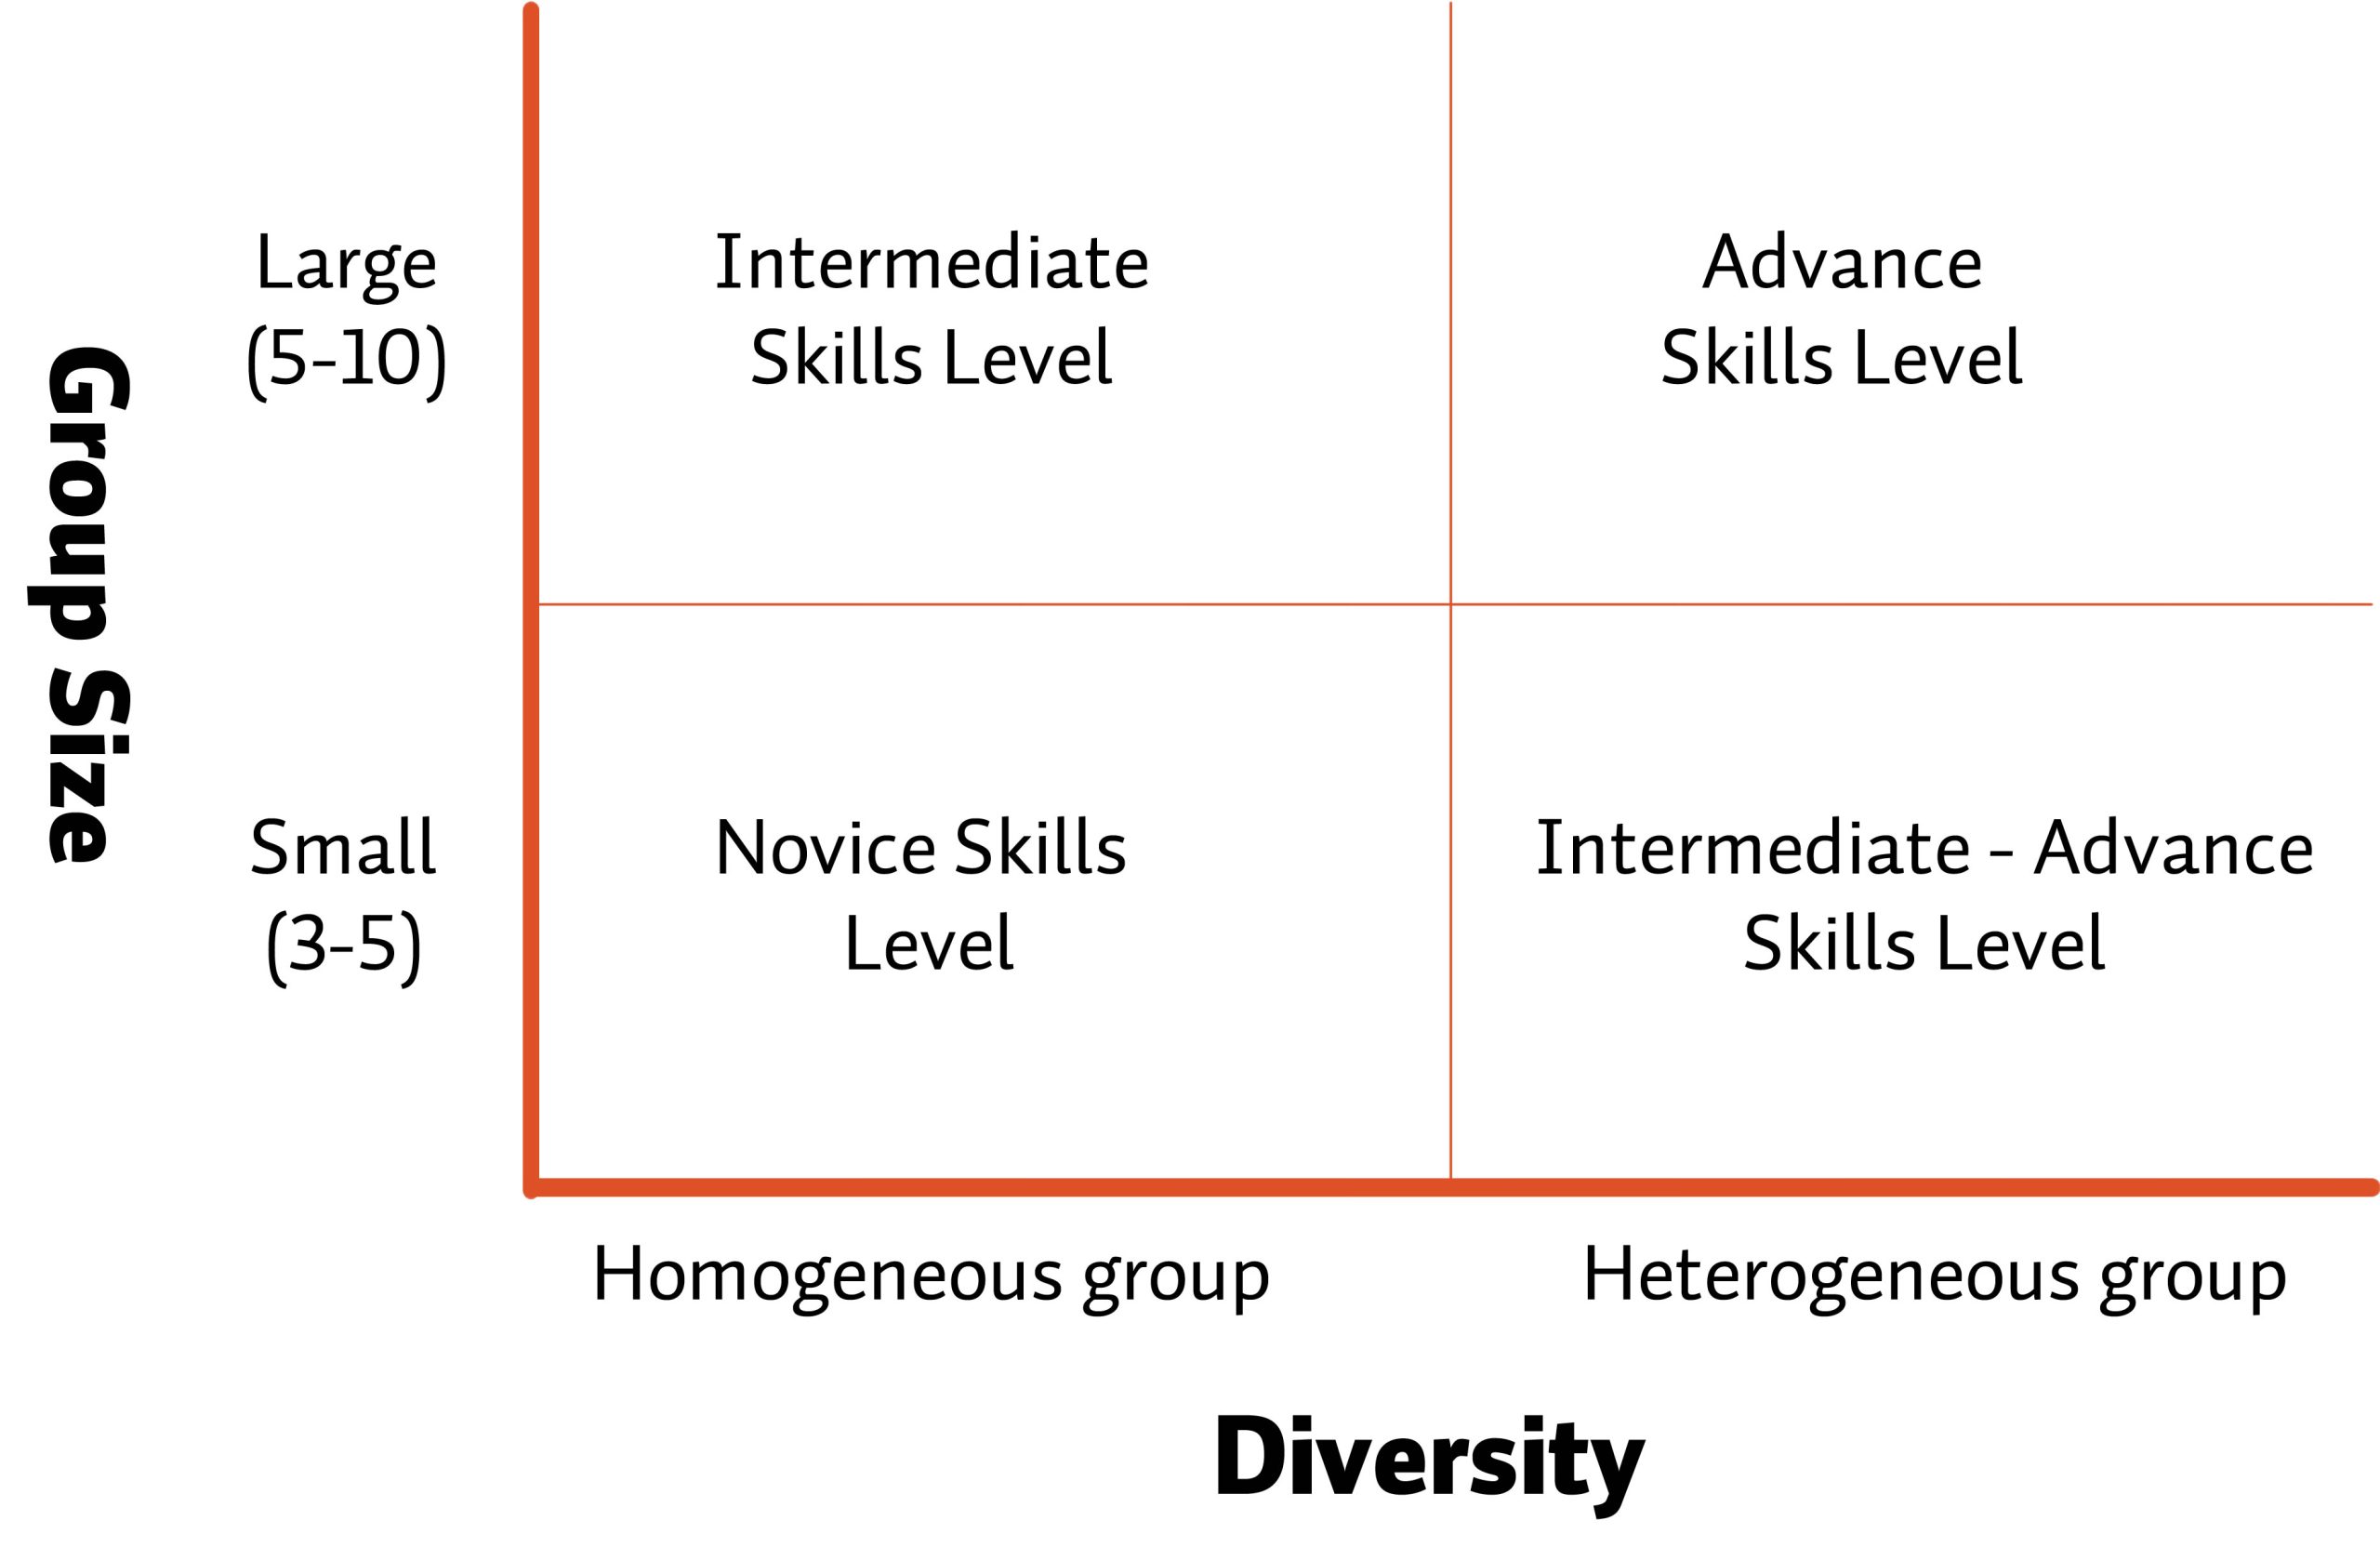 Figure 1: Pedagogical Considerations for Diversity in Team Composition.